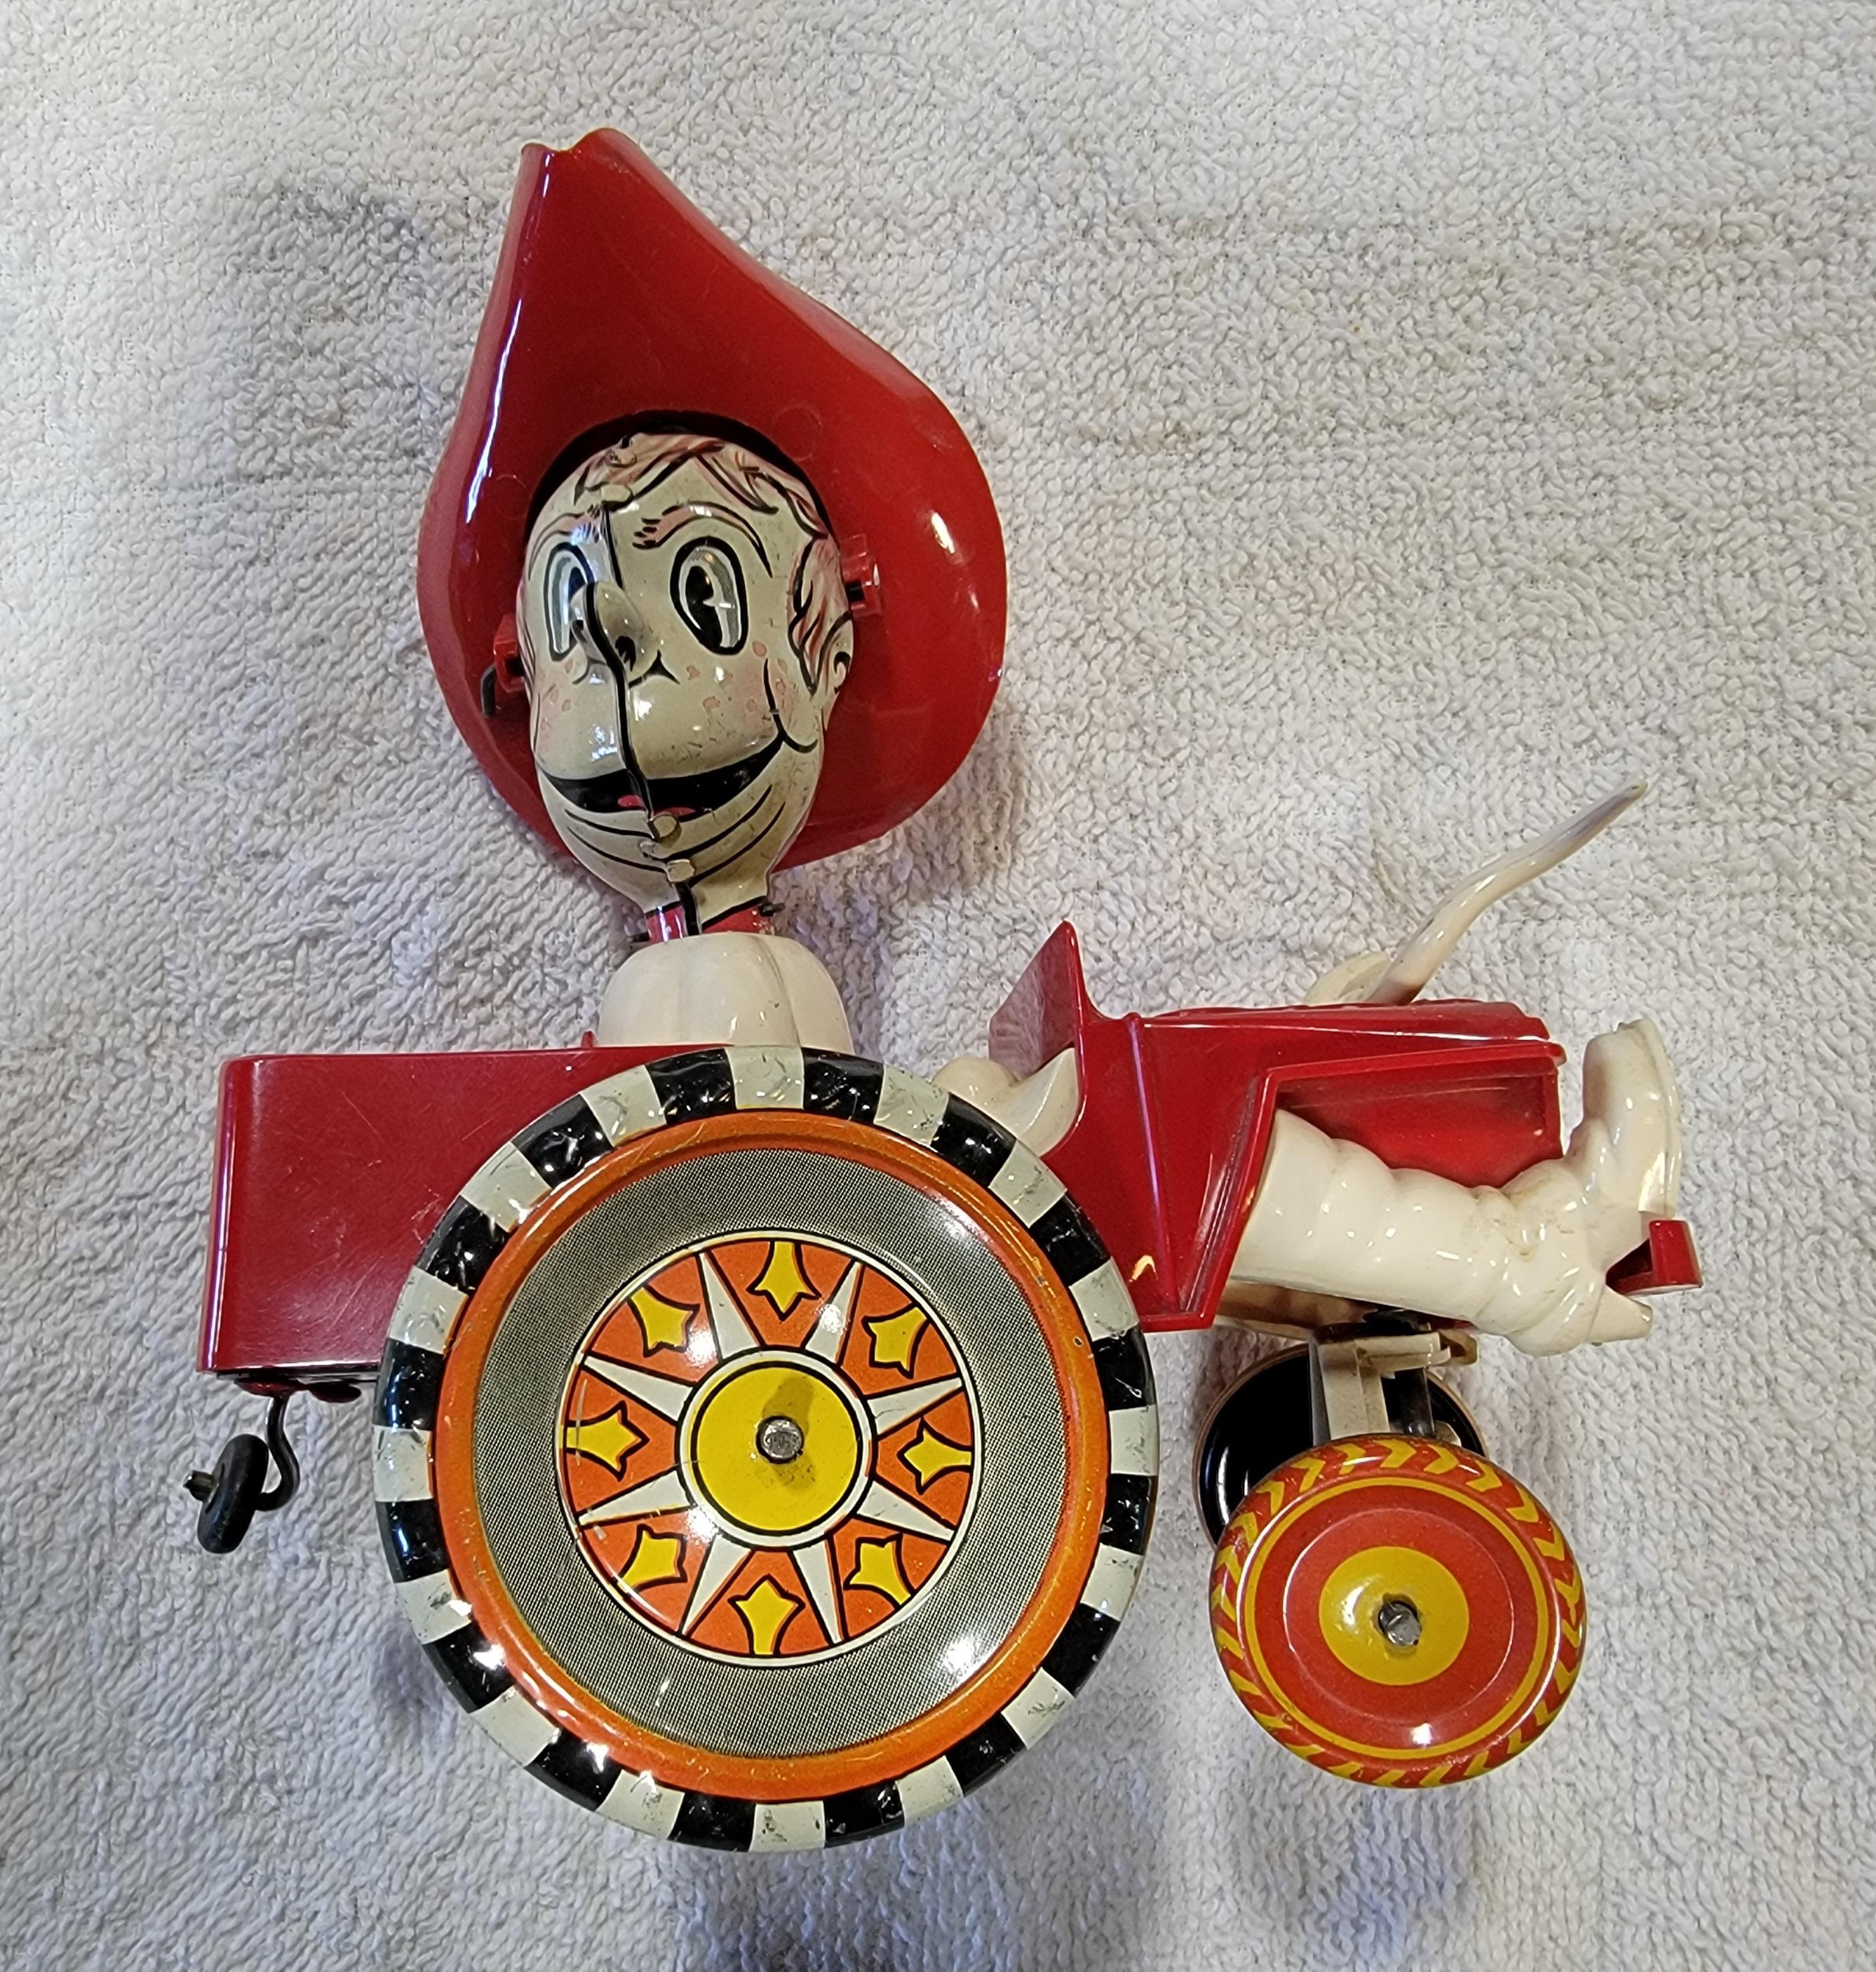 1950's Marx Toys tin lithograph and plastic wind-up Jeep with Cowboy driver. Notice cowboy boots and steer horns mounted to front grill. Excellent, original working condition. 